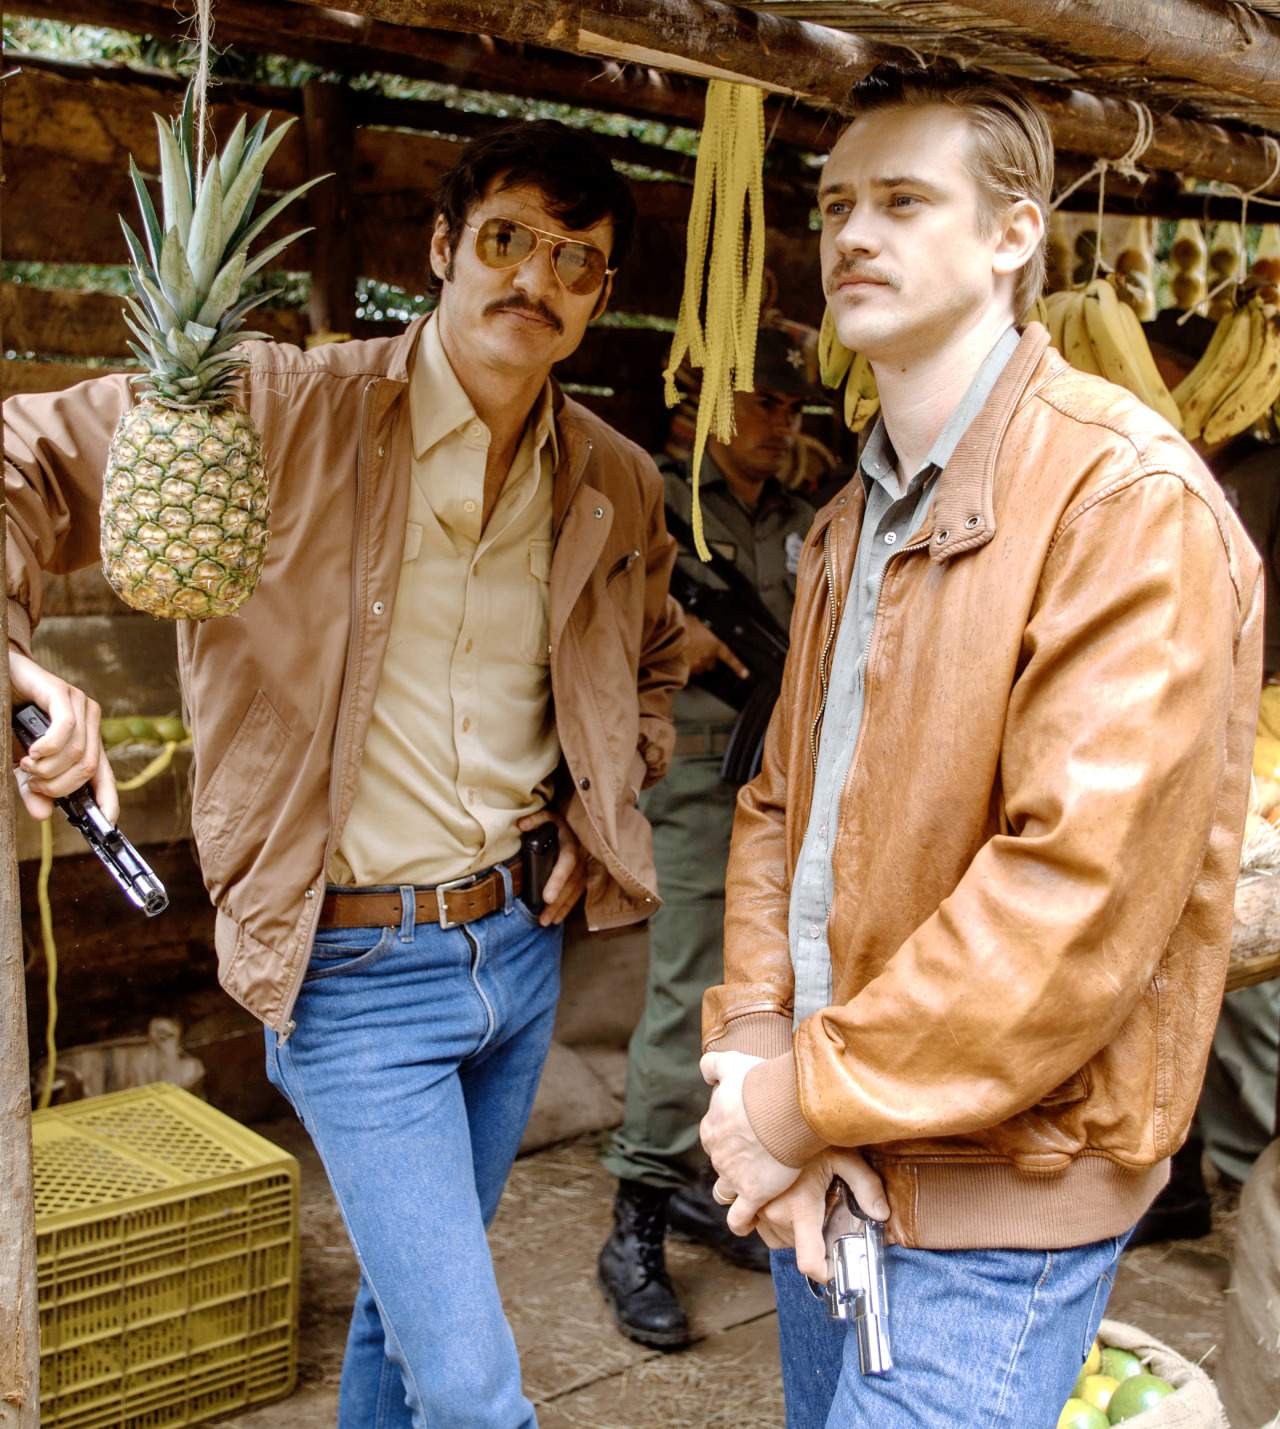 Pedro Pascal production stills from Narcos plus a few childhood photos of him